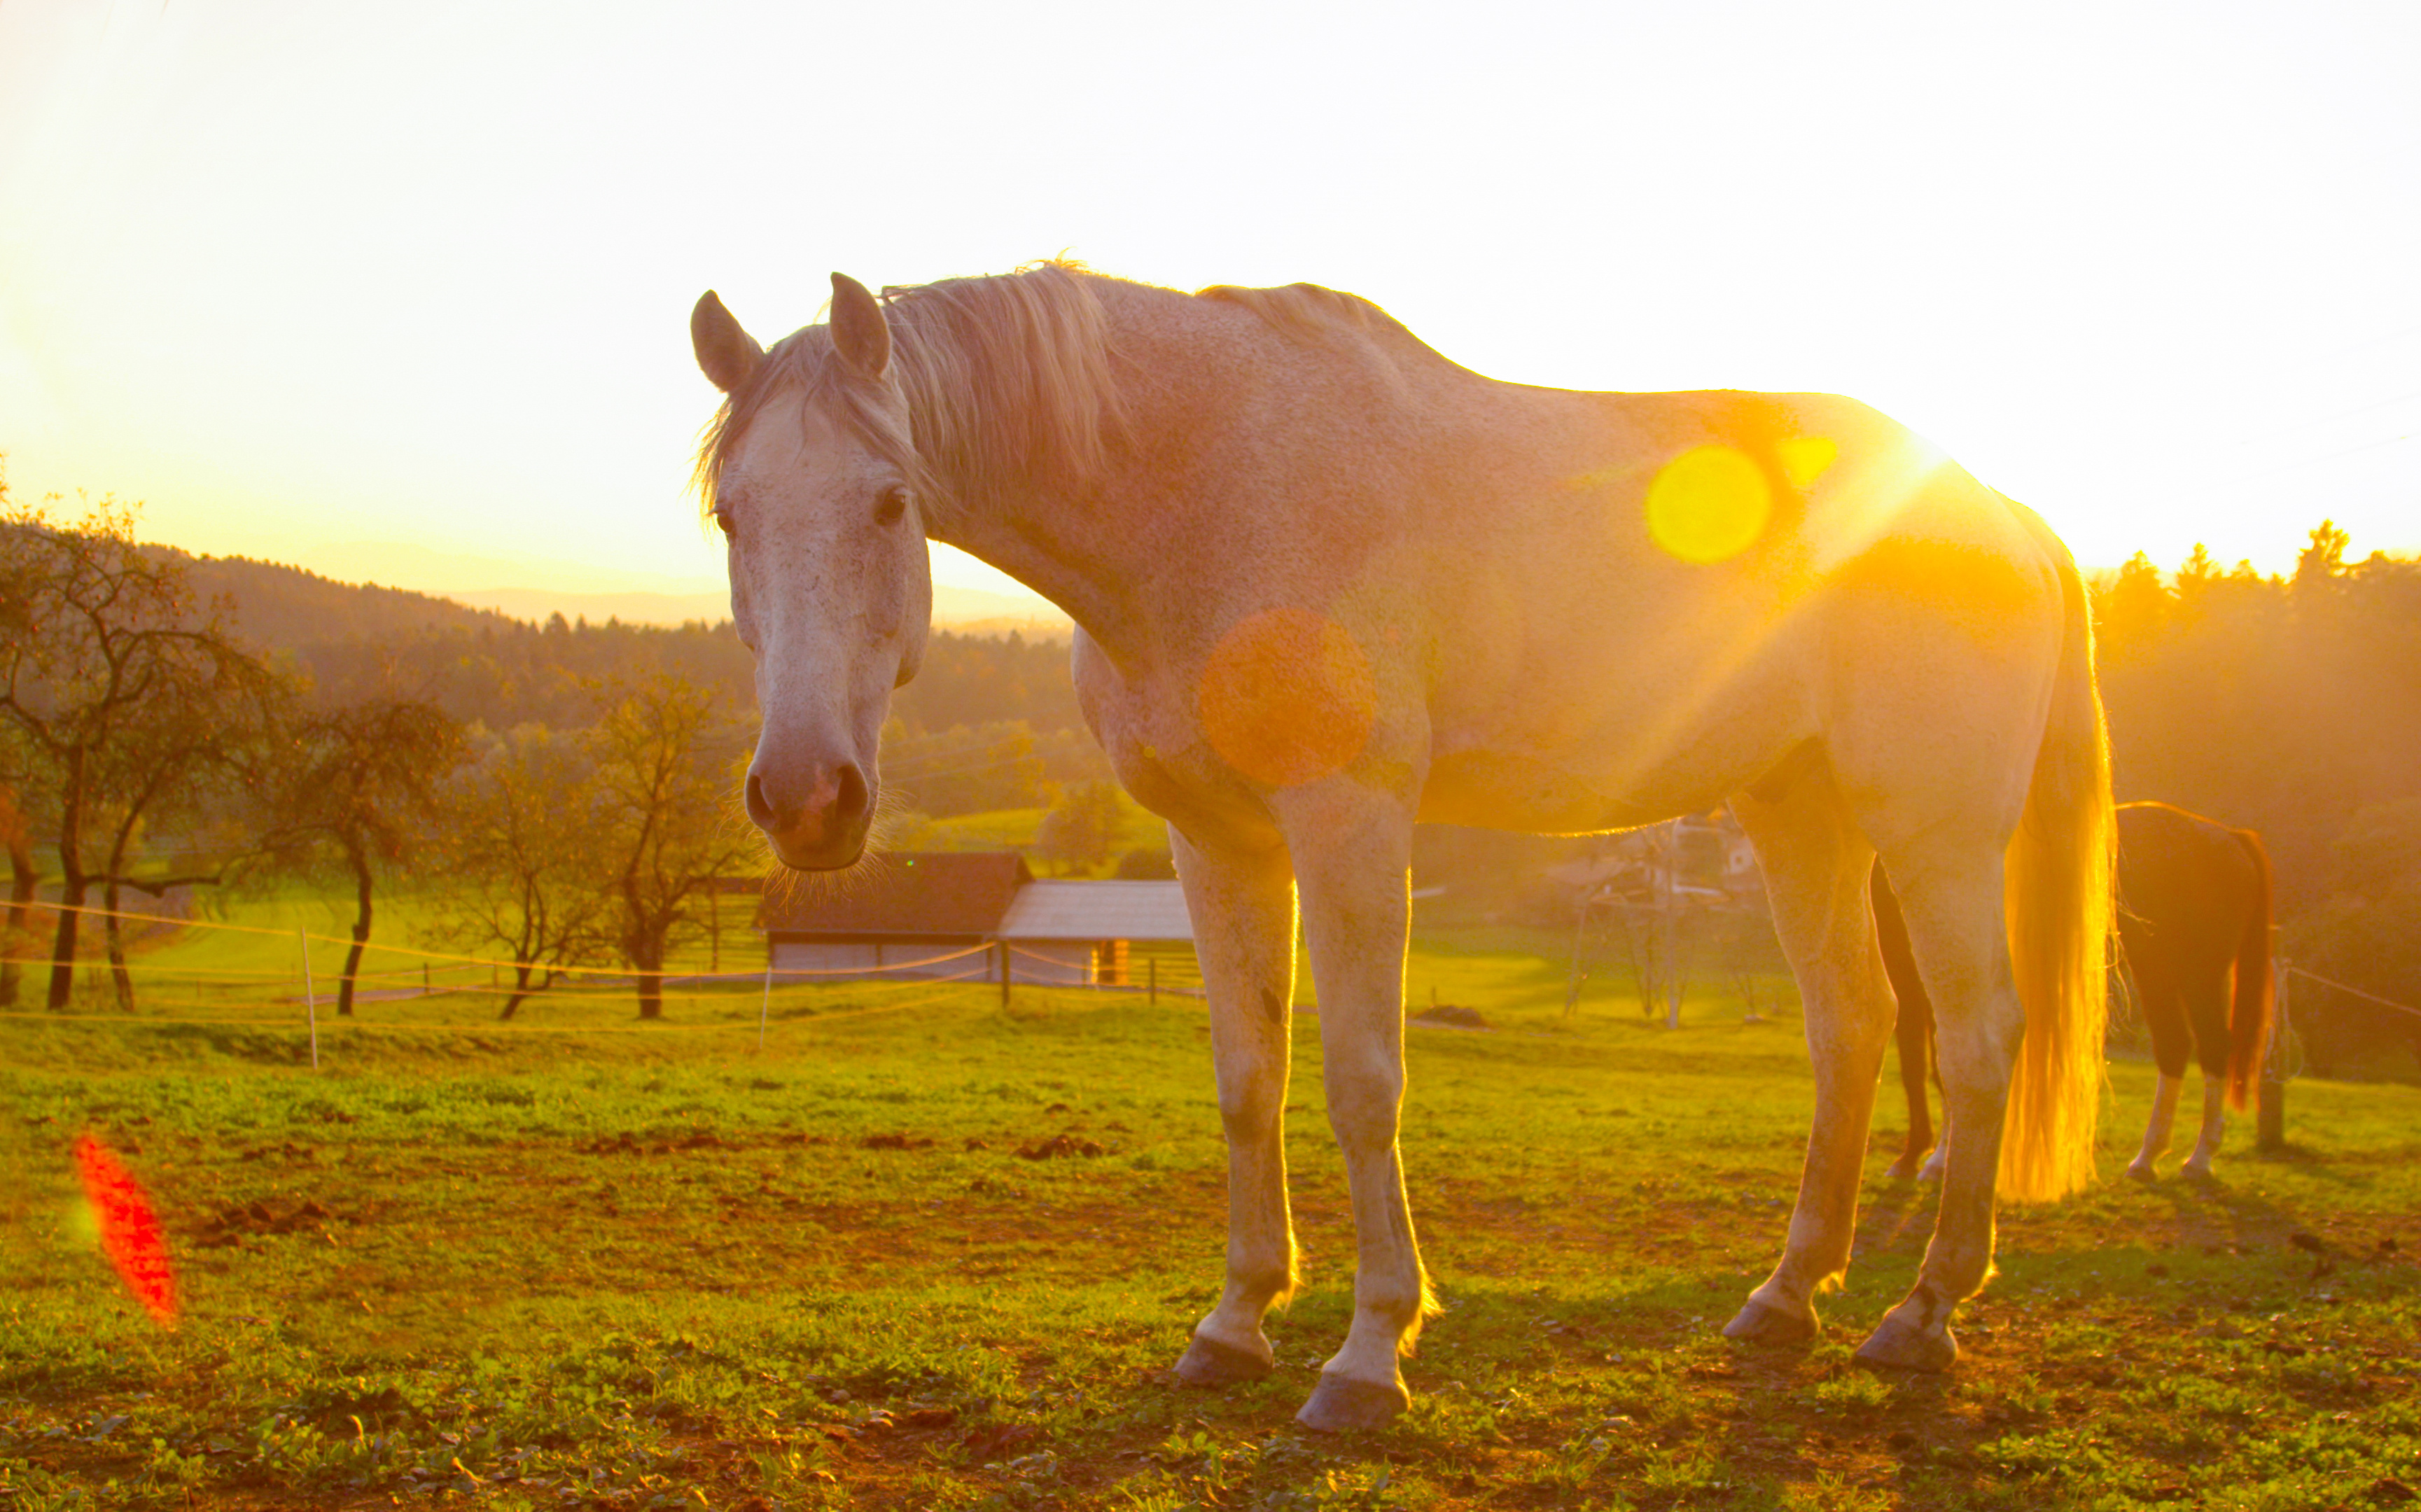 An older horse standing in a field at sunset.